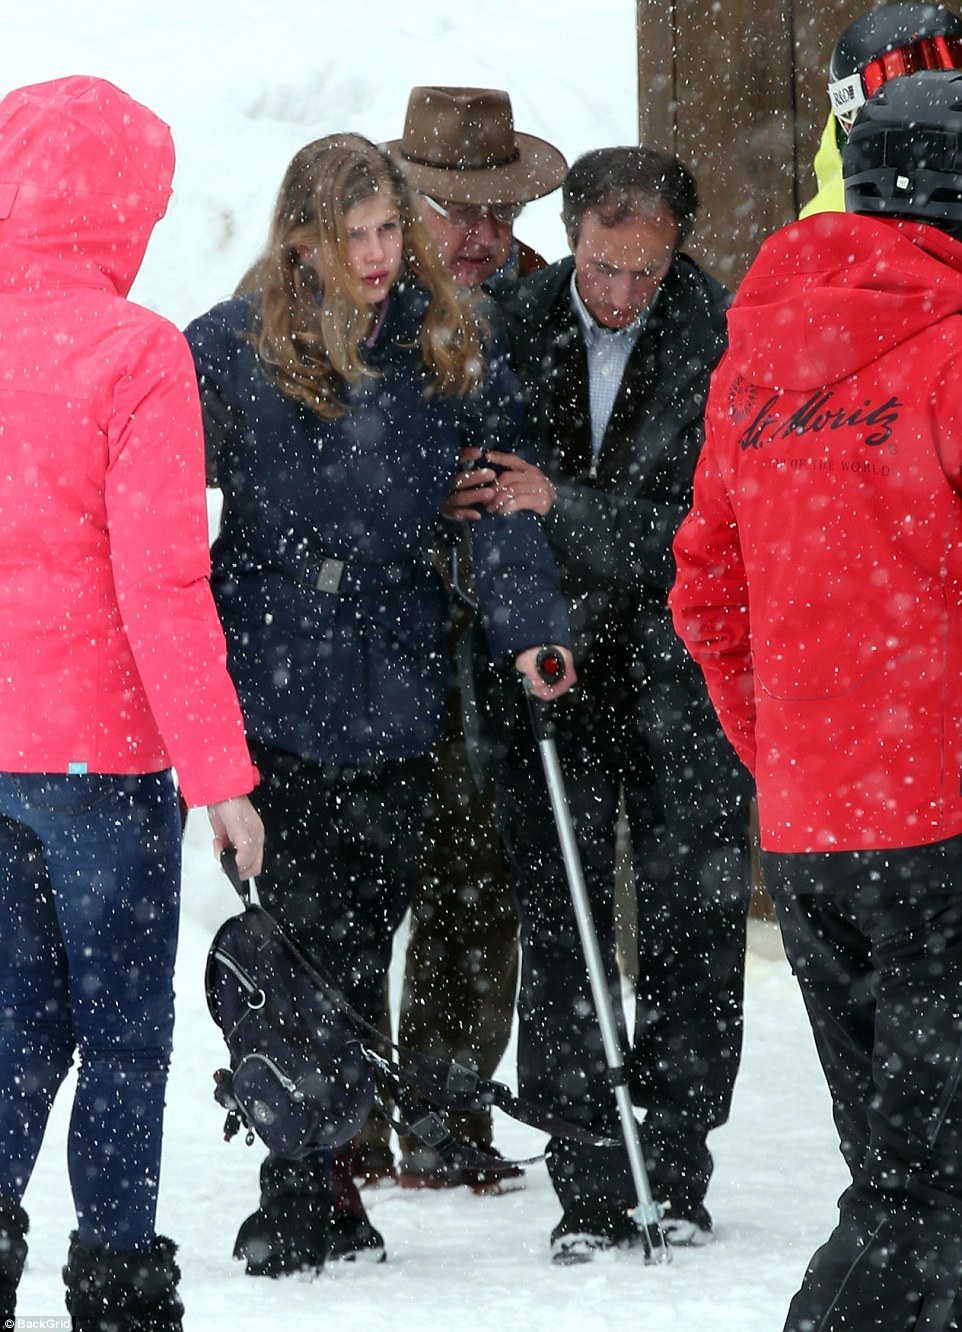 49583BA100000578-5405661-After_having_fun_on_the_slopes_Lady_Louise_Windsor_appeared_to_h-a-70_1518959830651.jpg